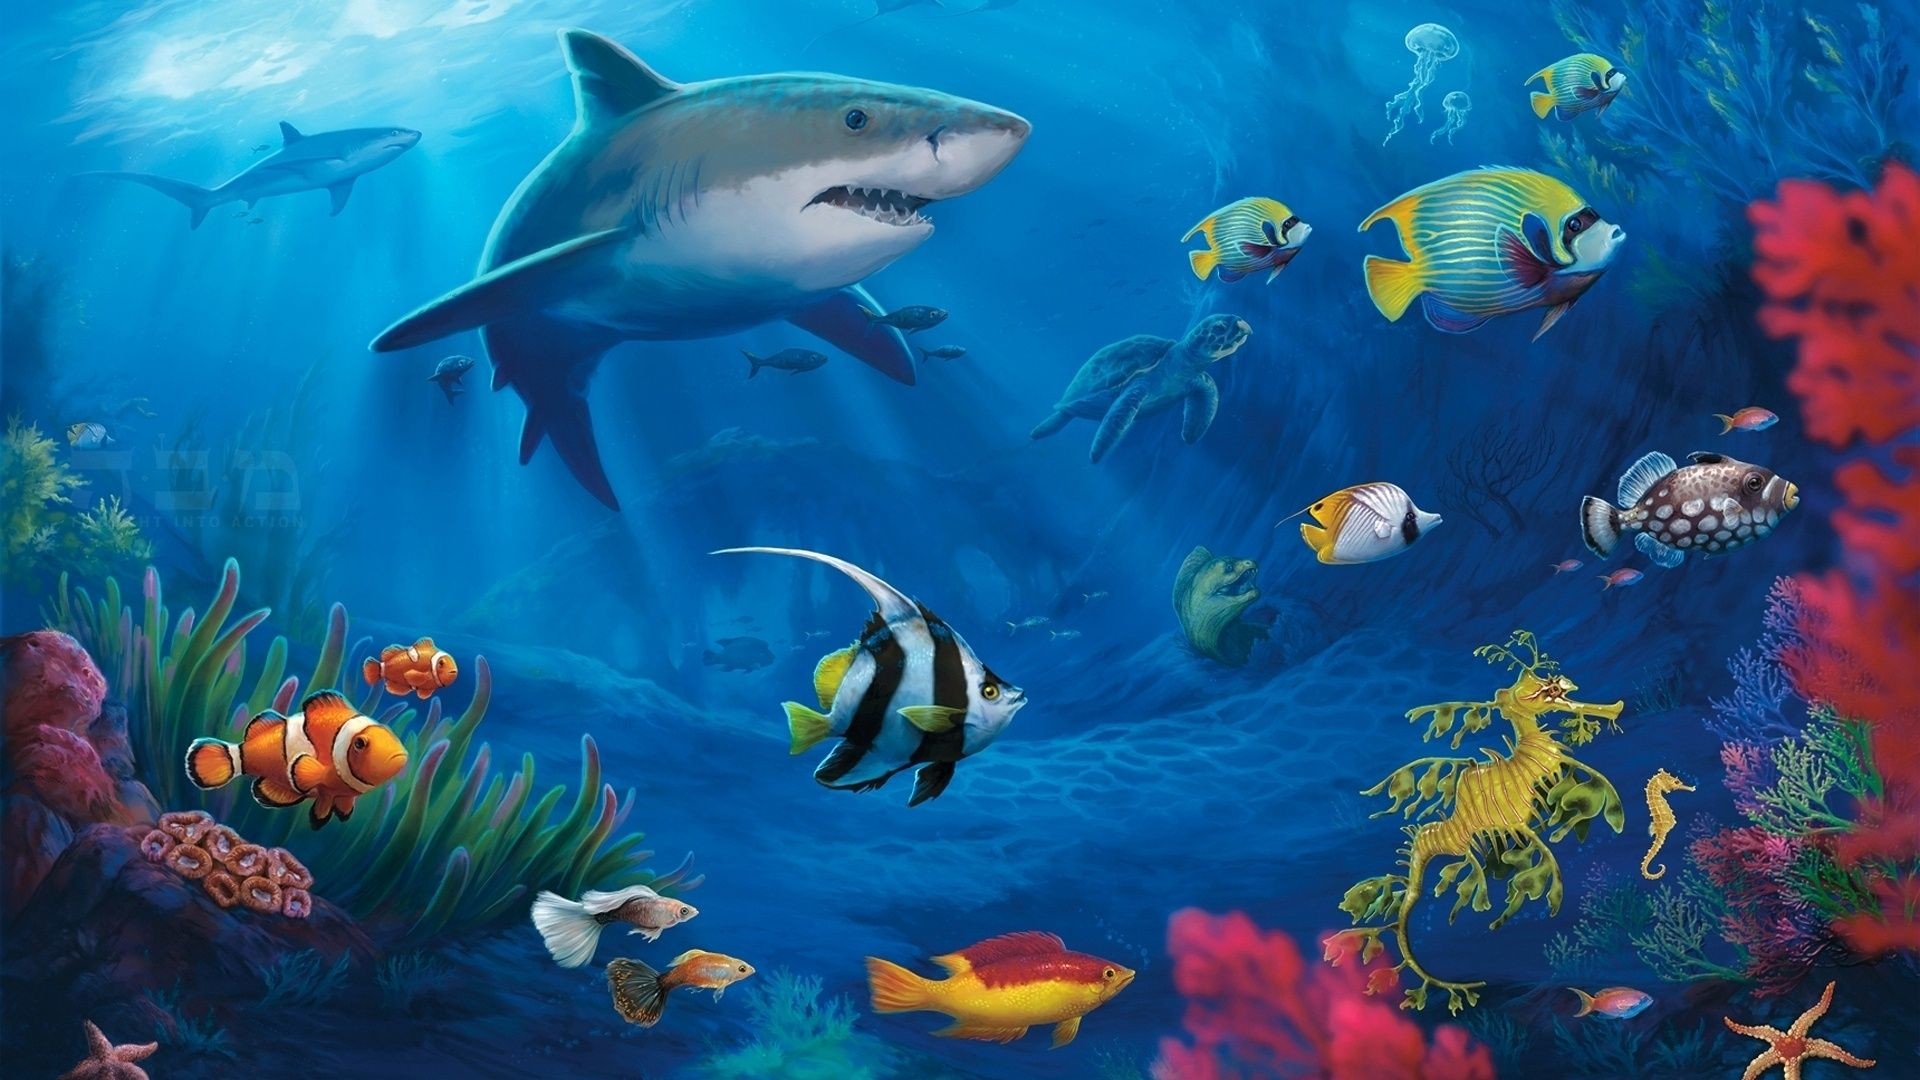 1920x1080 Fish Live Wallpaper For PC . More